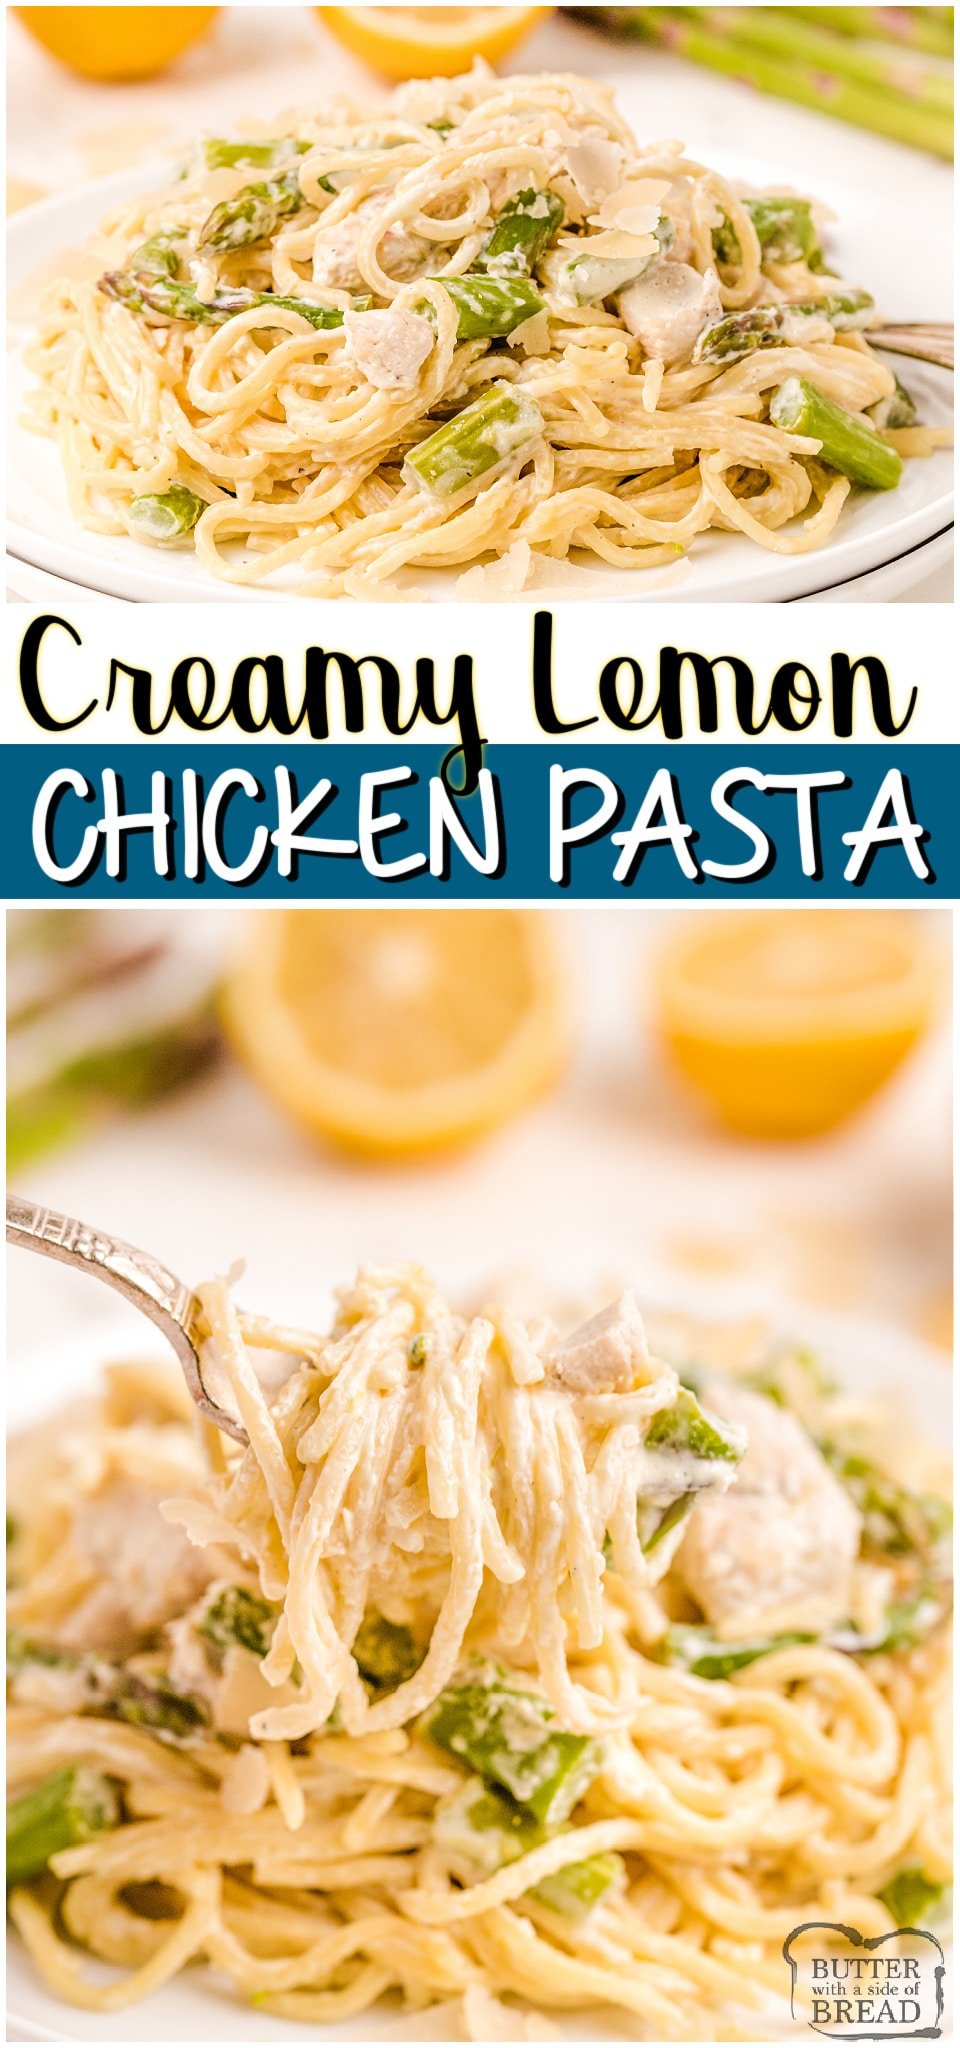 Creamy Lemon Chicken Pasta with Asparagus made easy with juicy chicken, fresh lemon and vegetables and a light, creamy sauce. Perfect weeknight lemon chicken dinner.